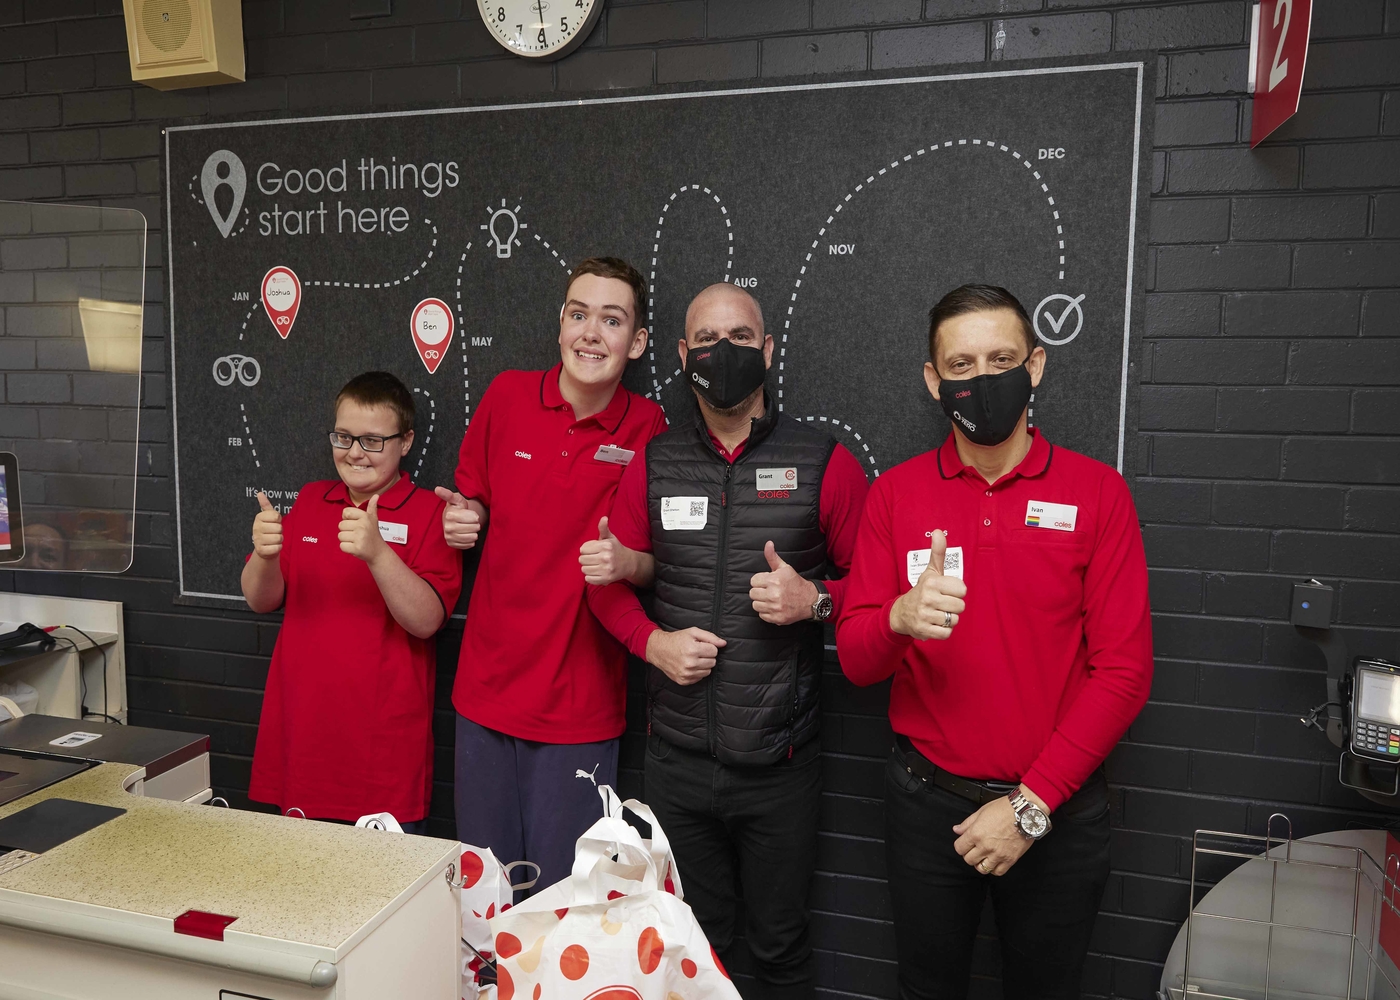 Coles has fitted out a fully functioning supermarket at St Lucy’s School